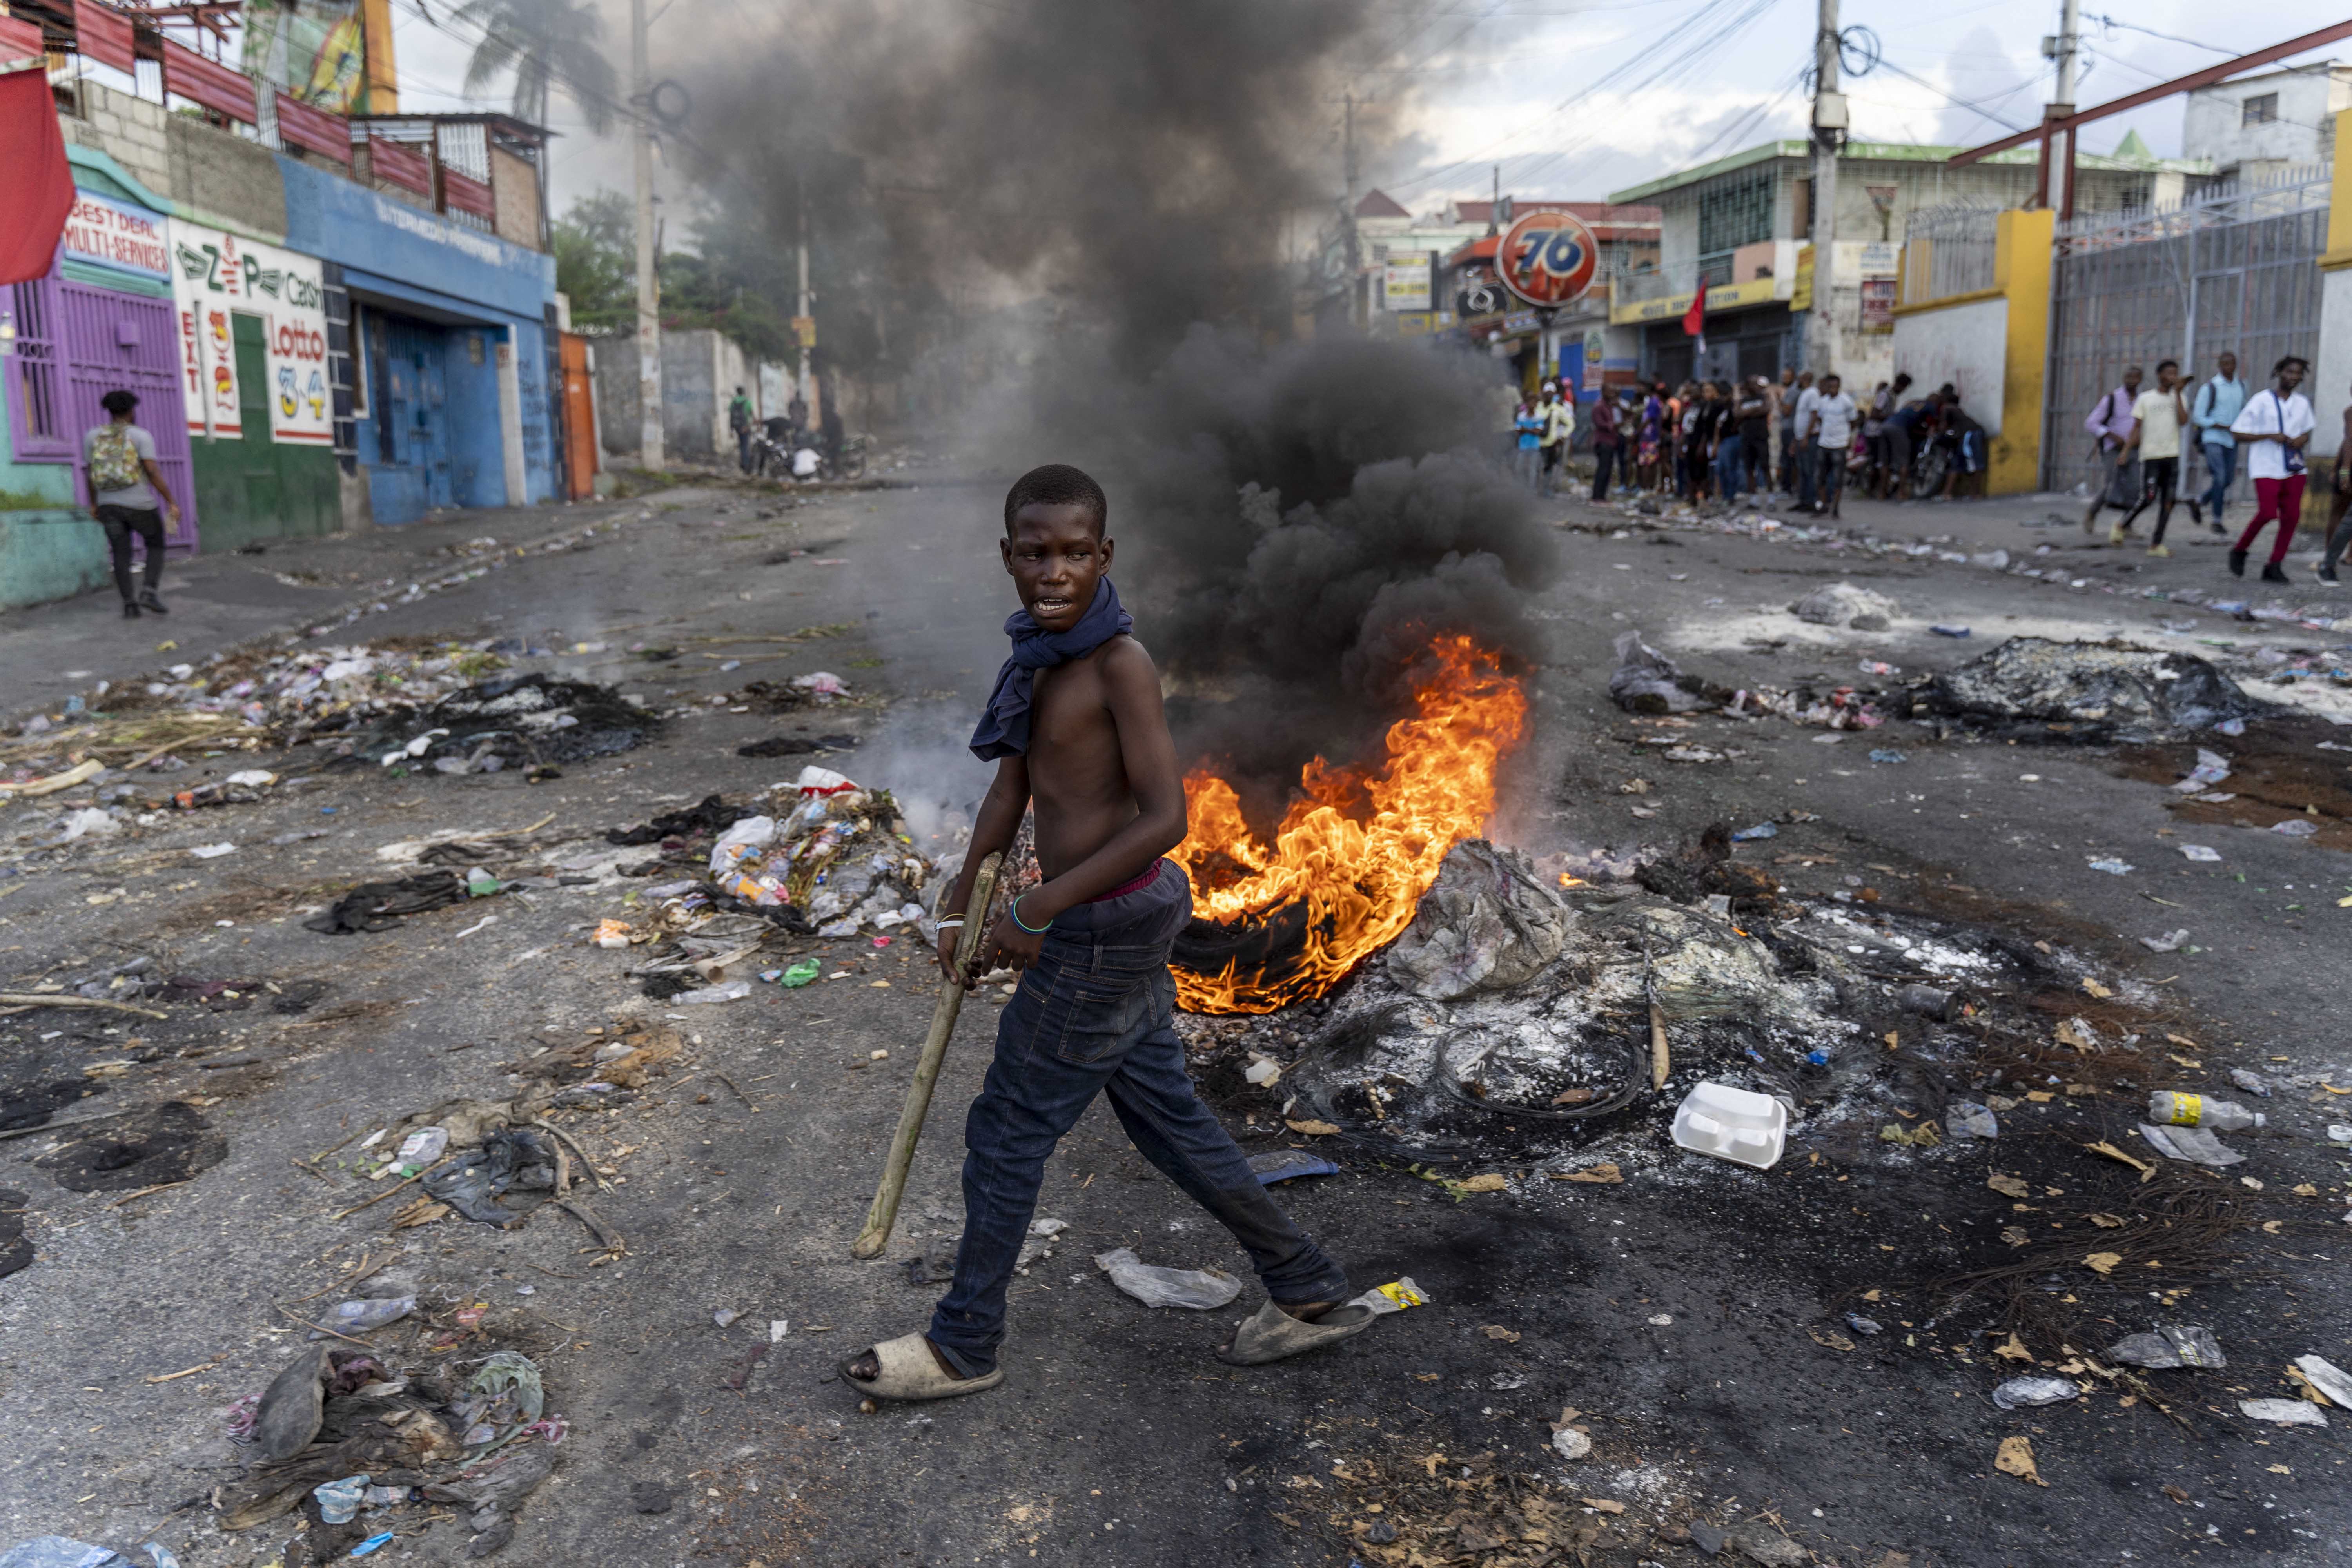 Violence in Port-au-Prince has reached unprecedented levels